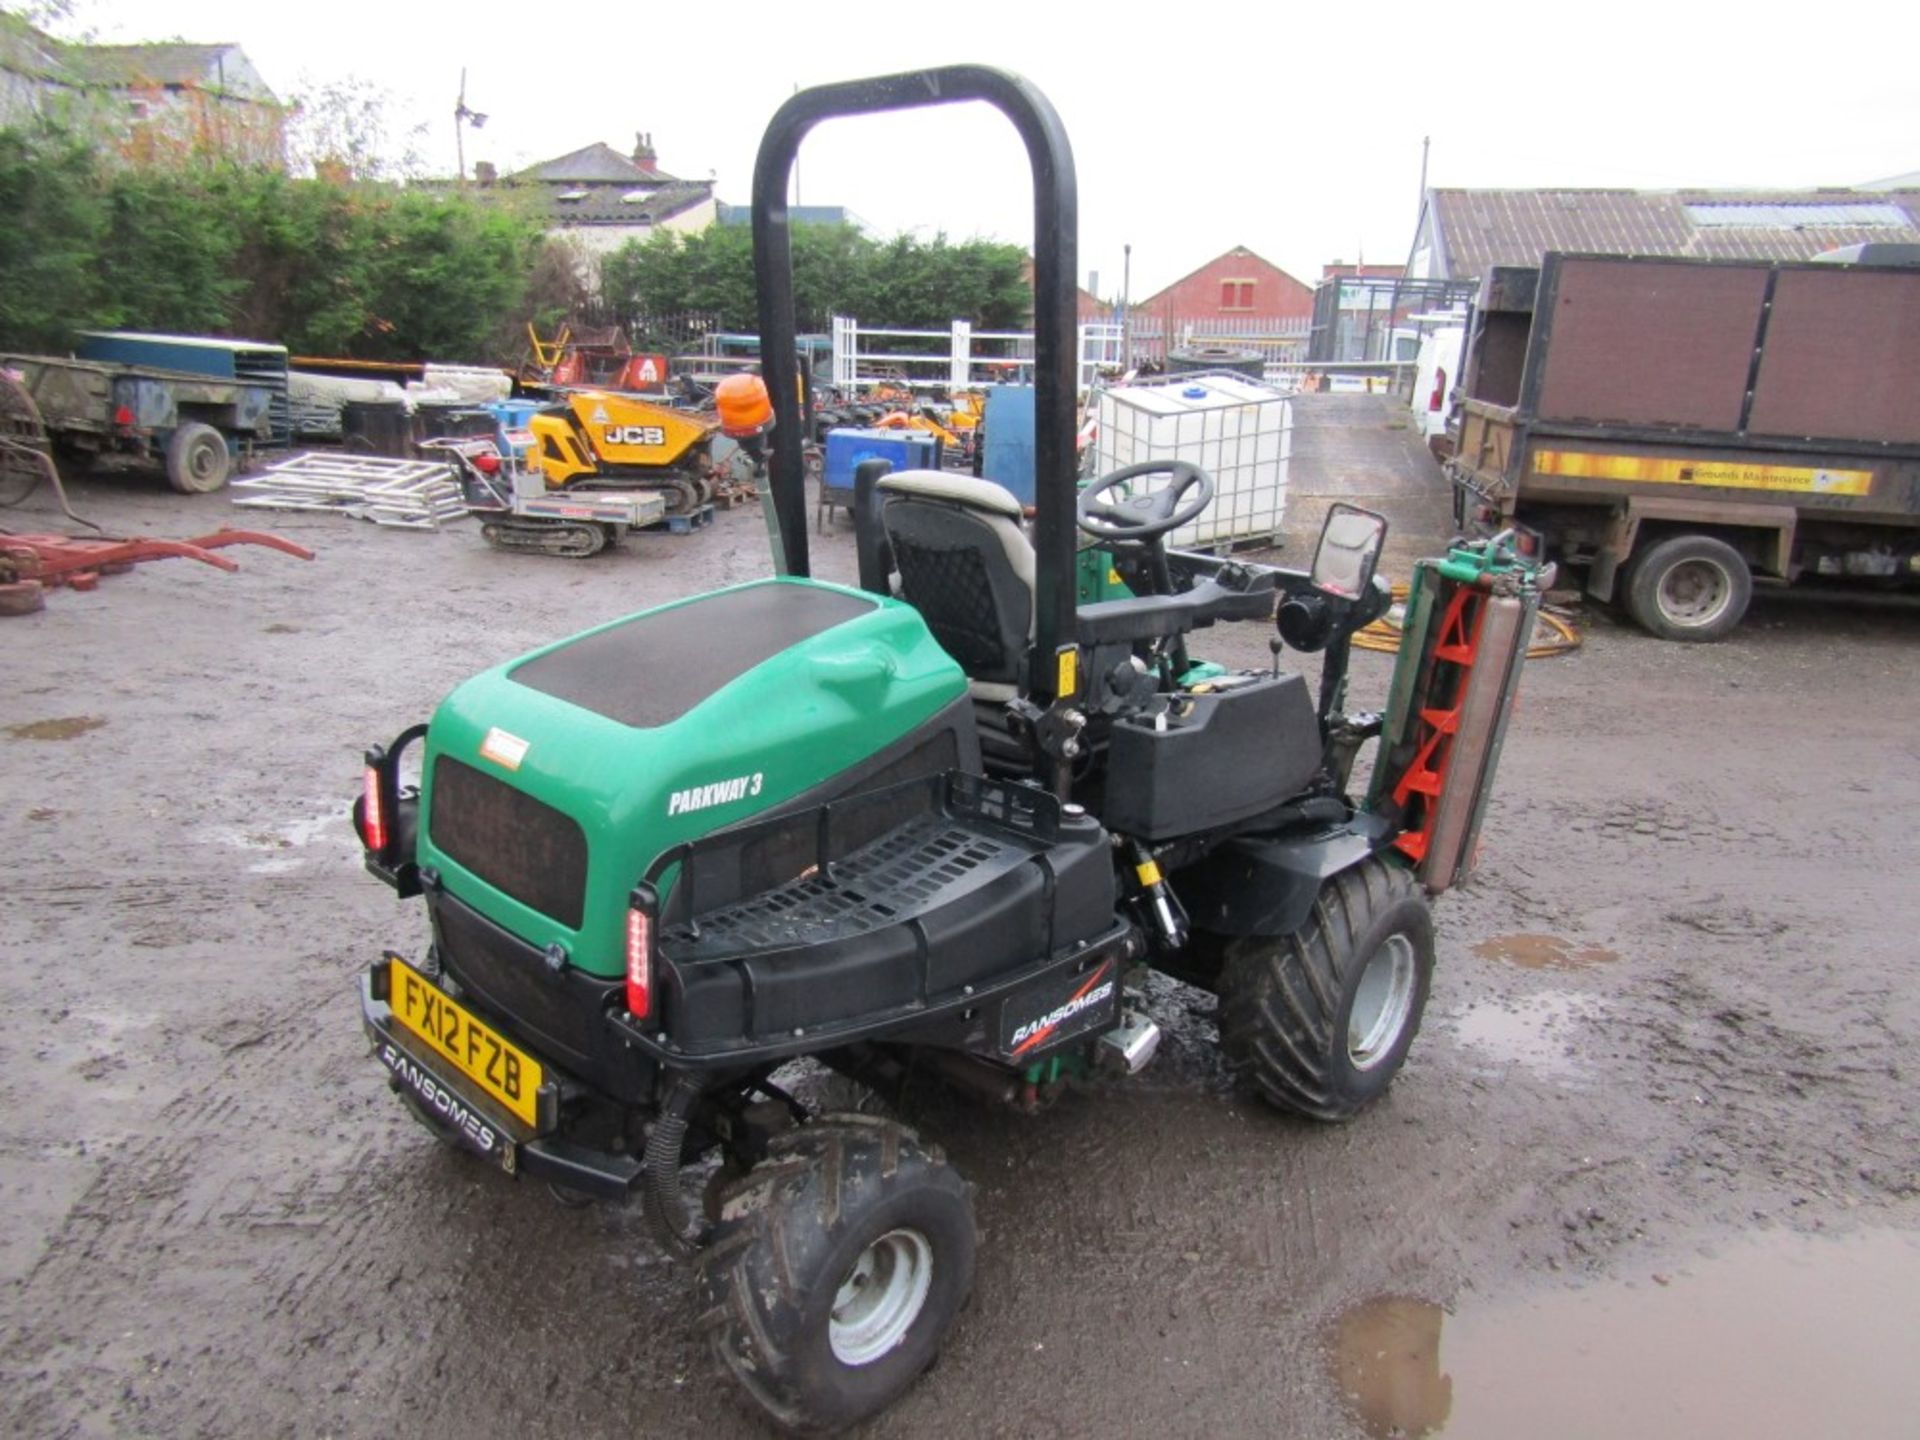 12 reg RANSOMES PARKWAY 3 RIDE ON MOWER (DIRECT COUNCIL) 1ST REG 04/12, V5 HERE, 1 FORMER - Image 4 of 5